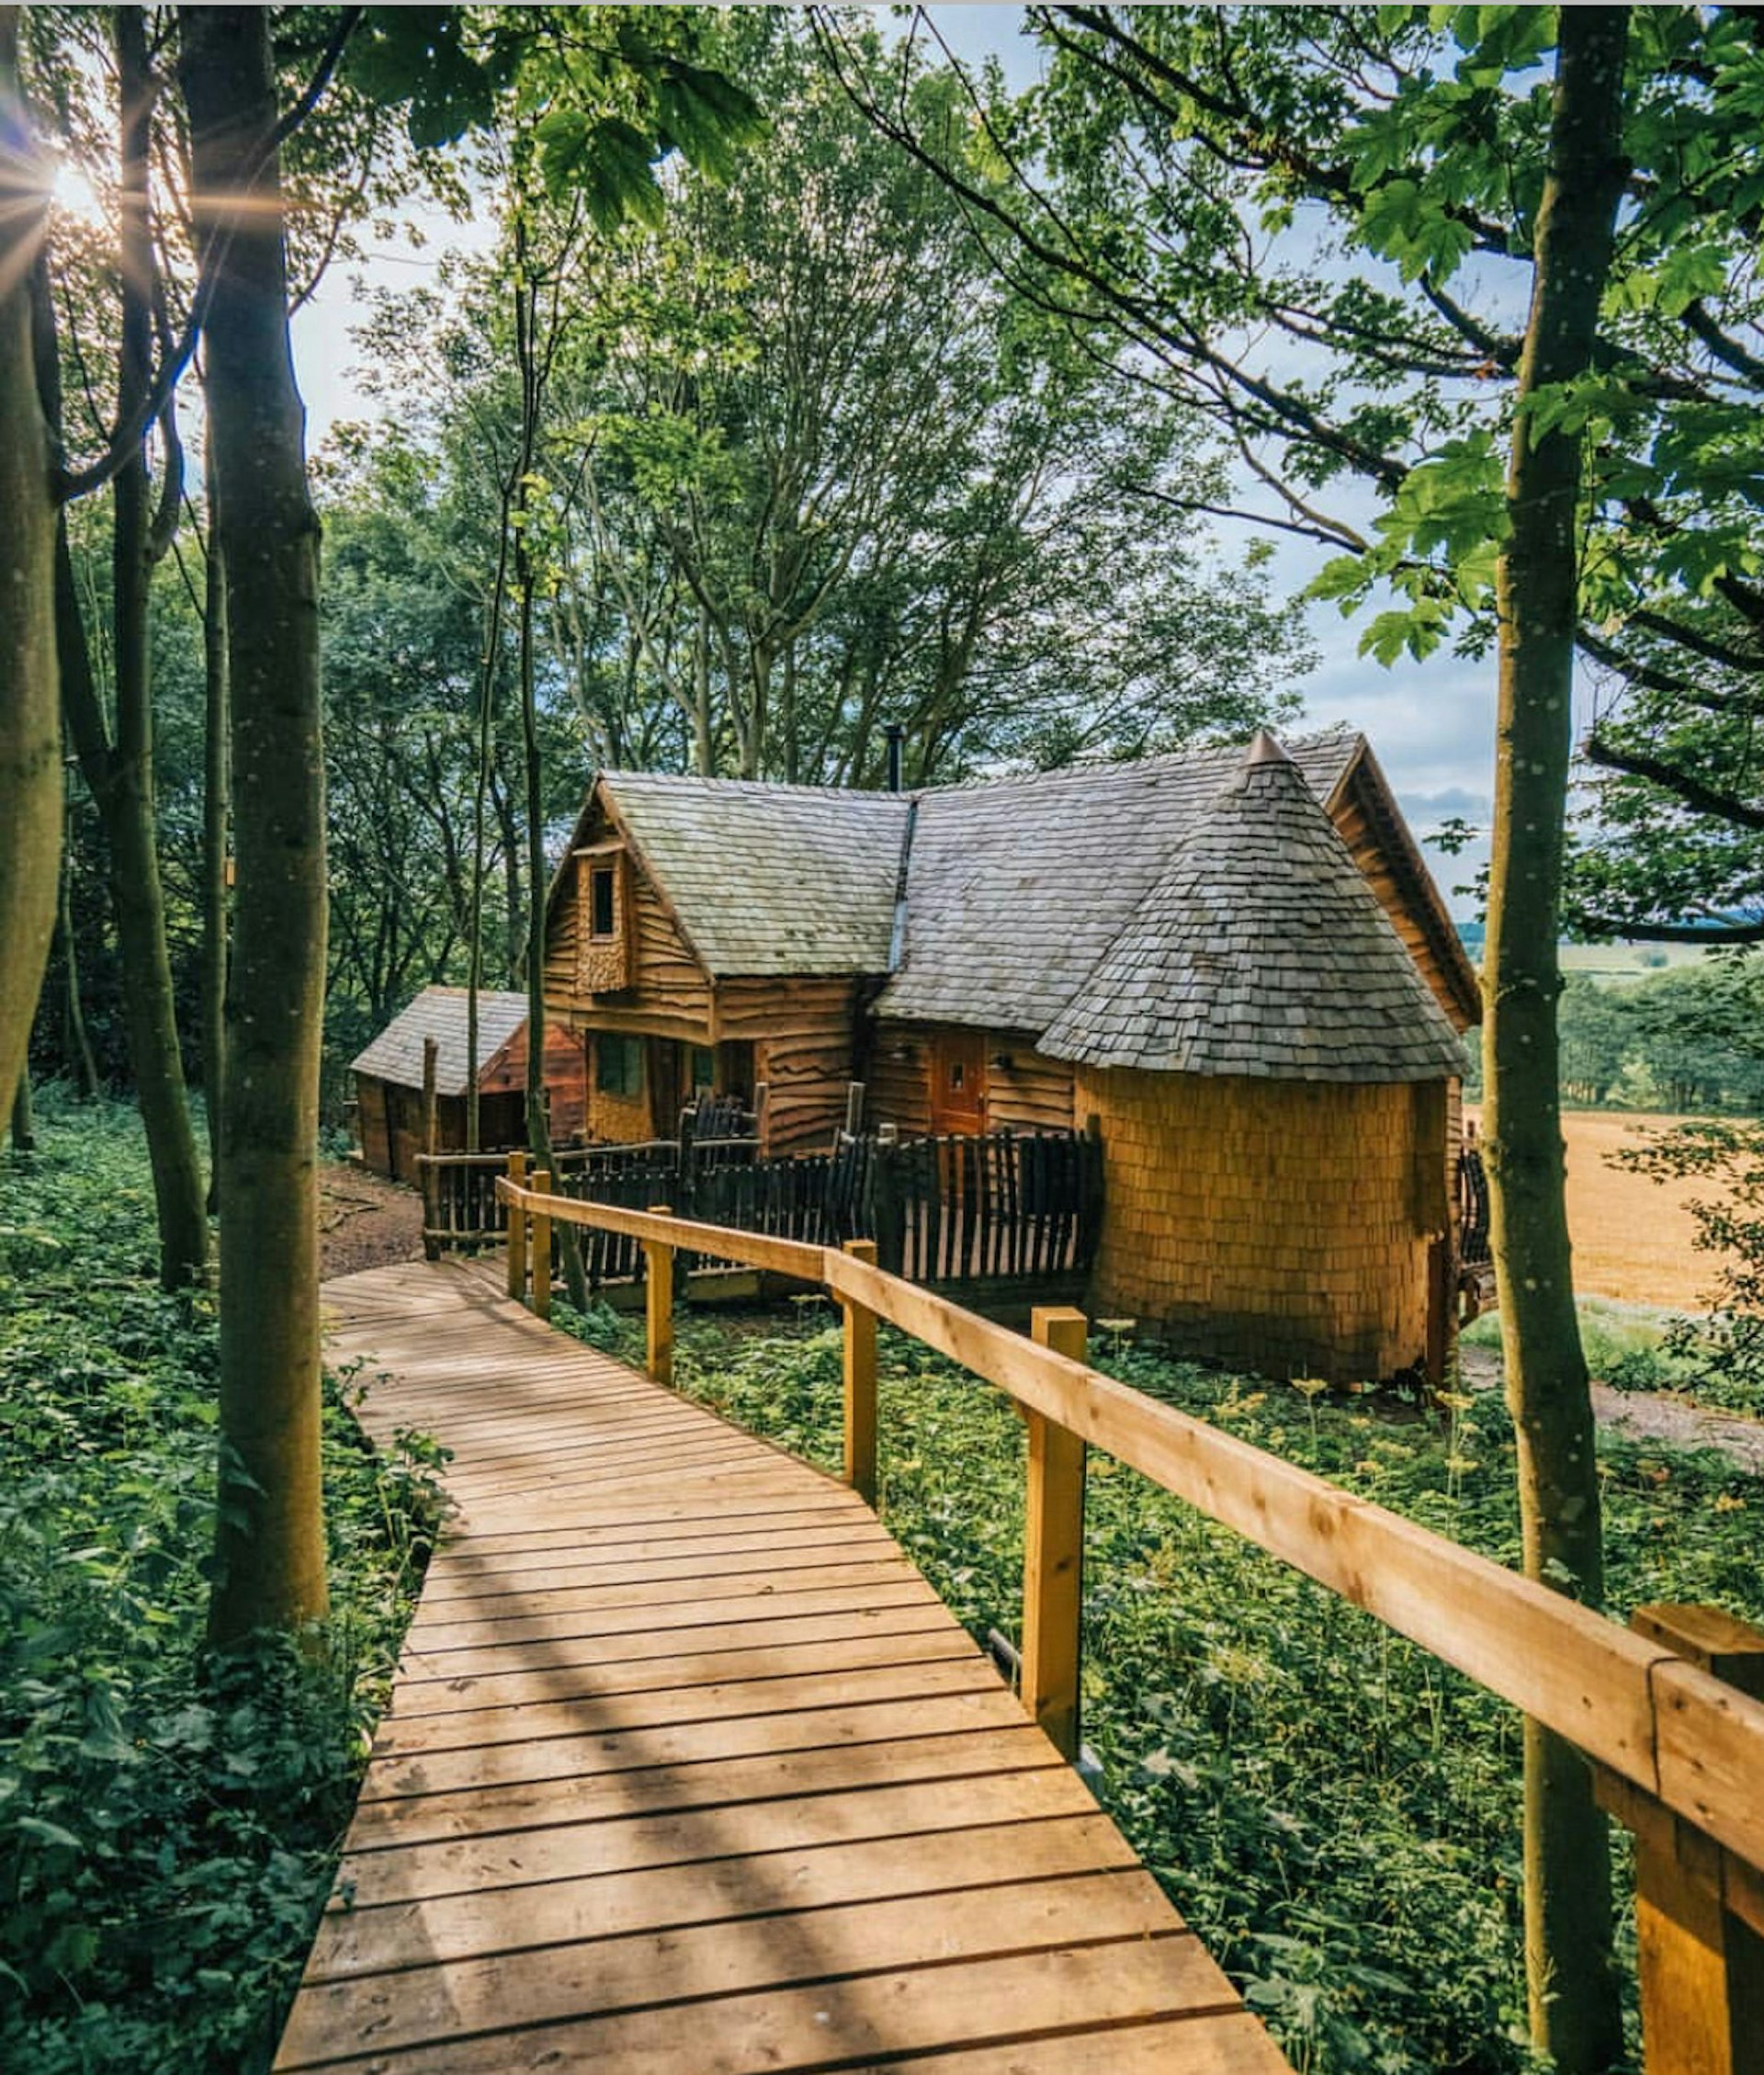 A wooden walkway leads to a turreted wooden building among woodland